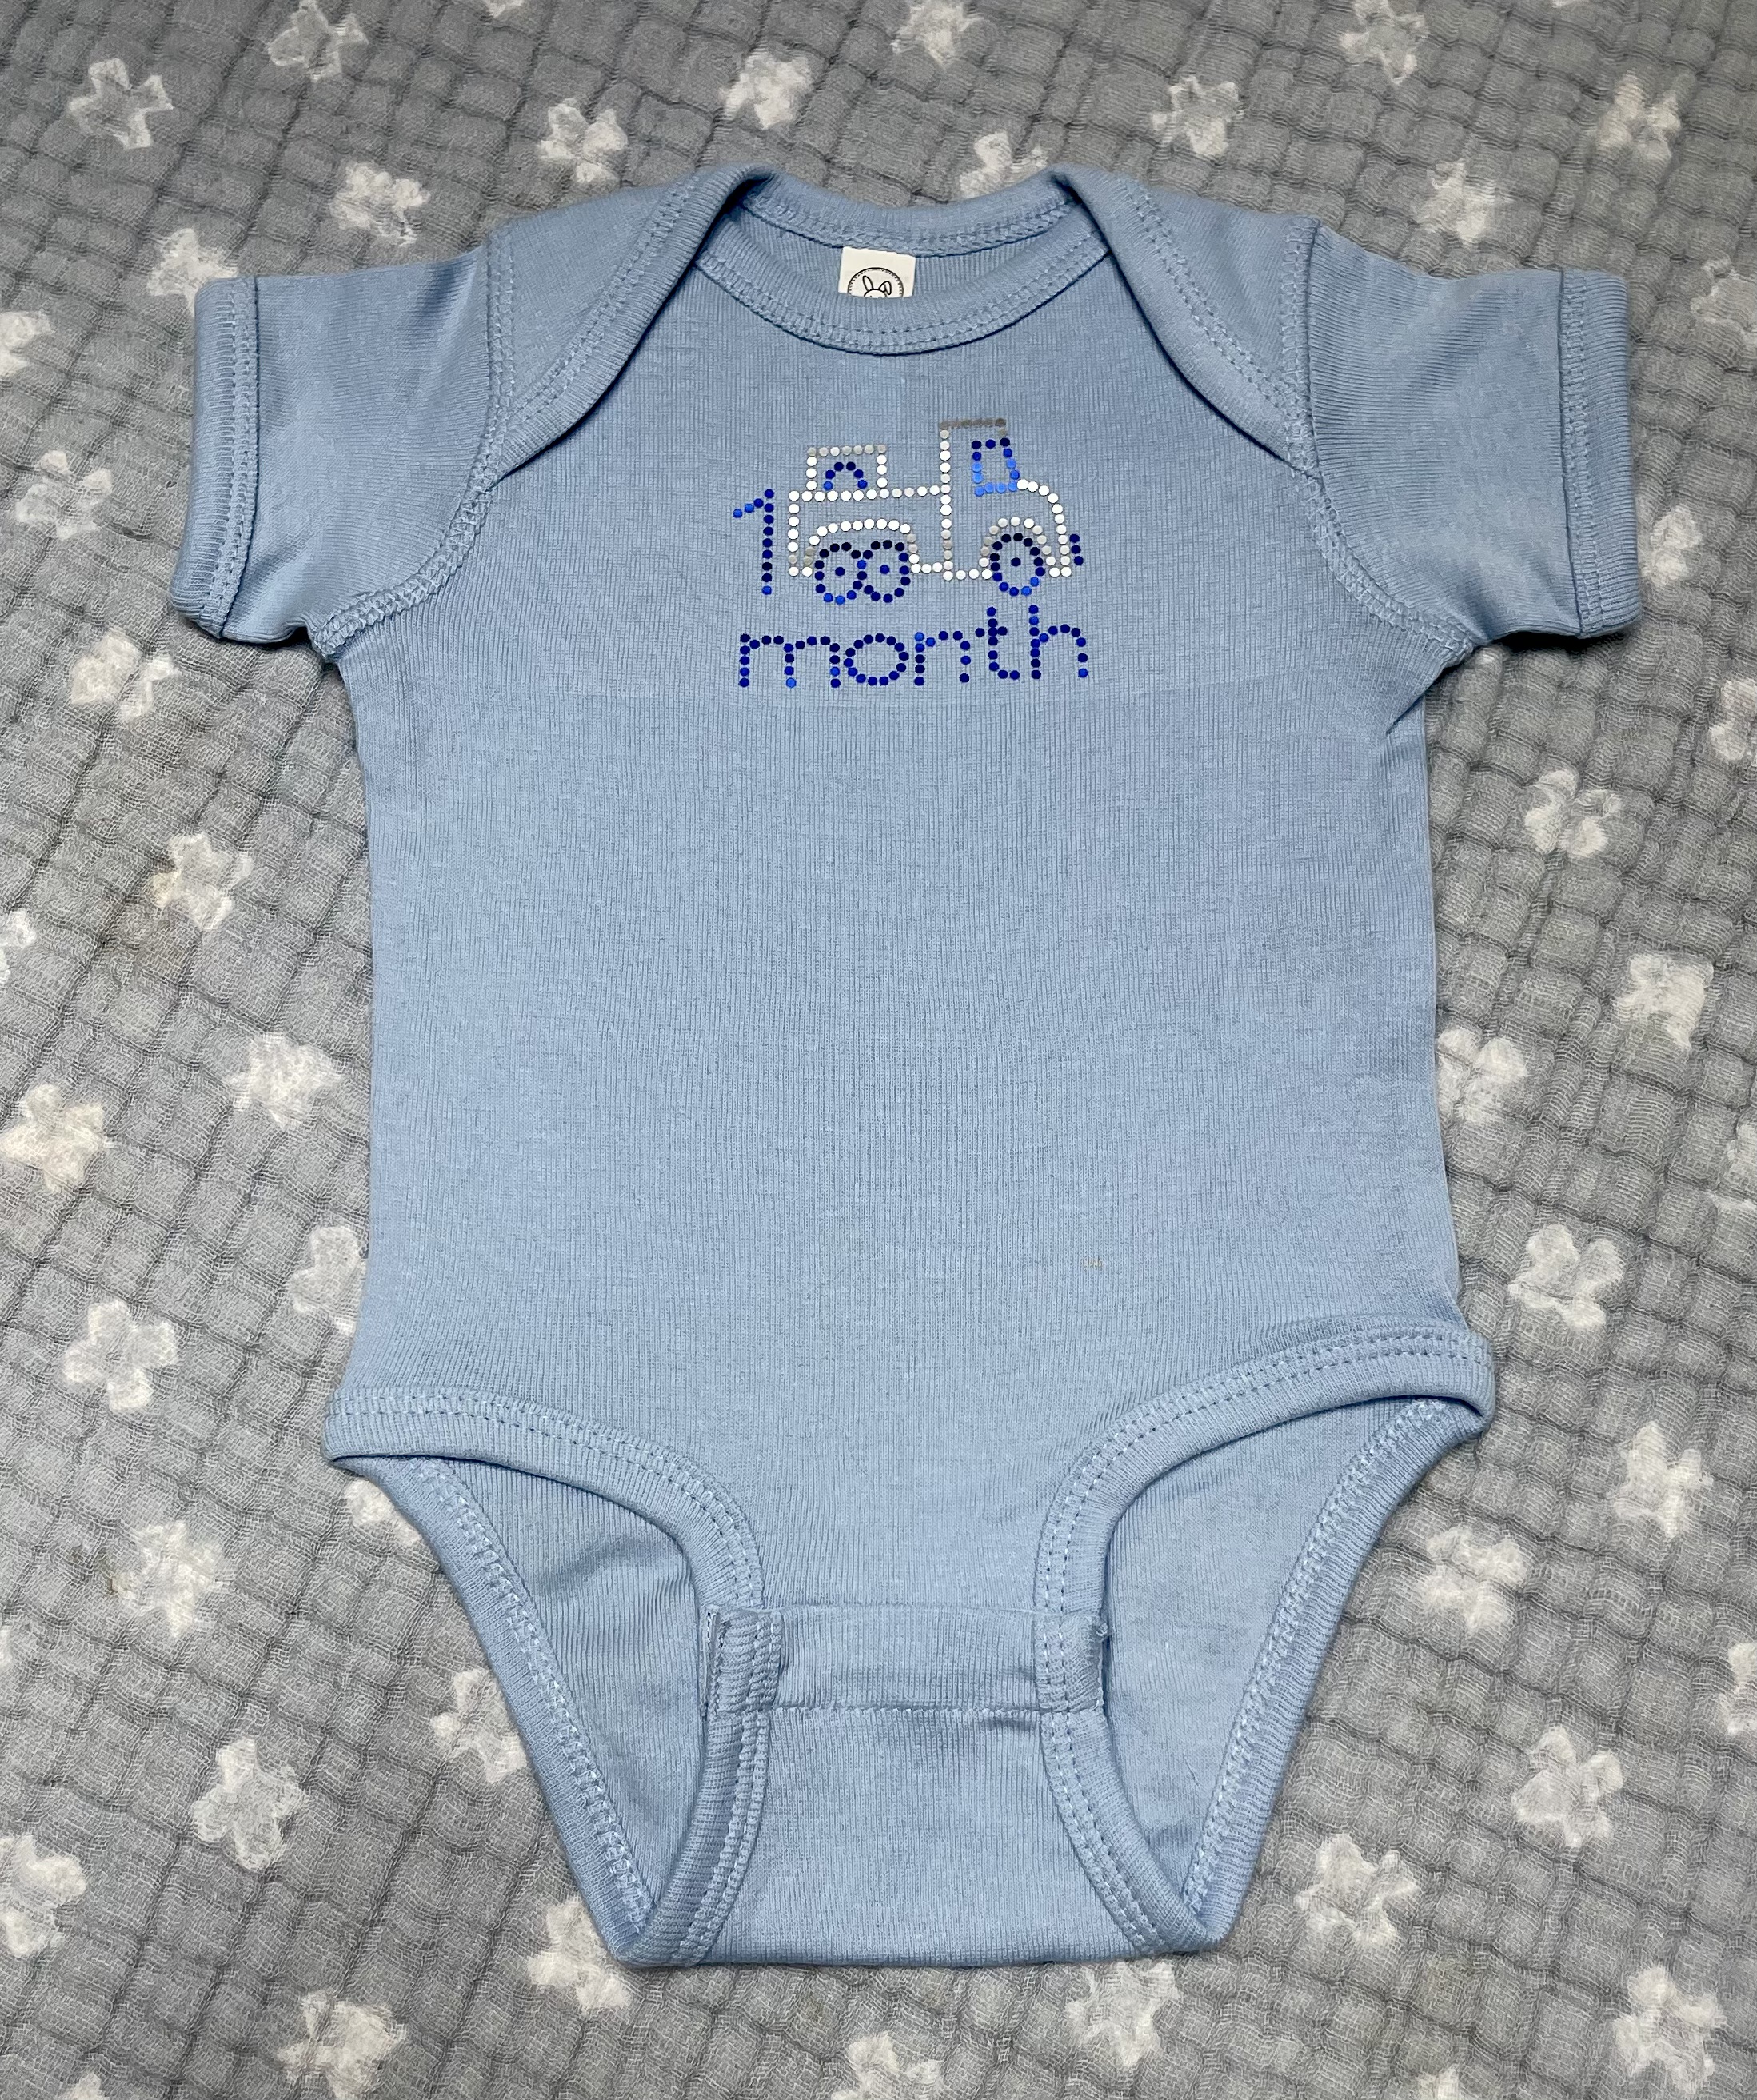 This Month by Month Baby Onesie is made with love by All Branded Out Apparel! Shop more unique gift ideas today with Spots Initiatives, the best way to support creators.